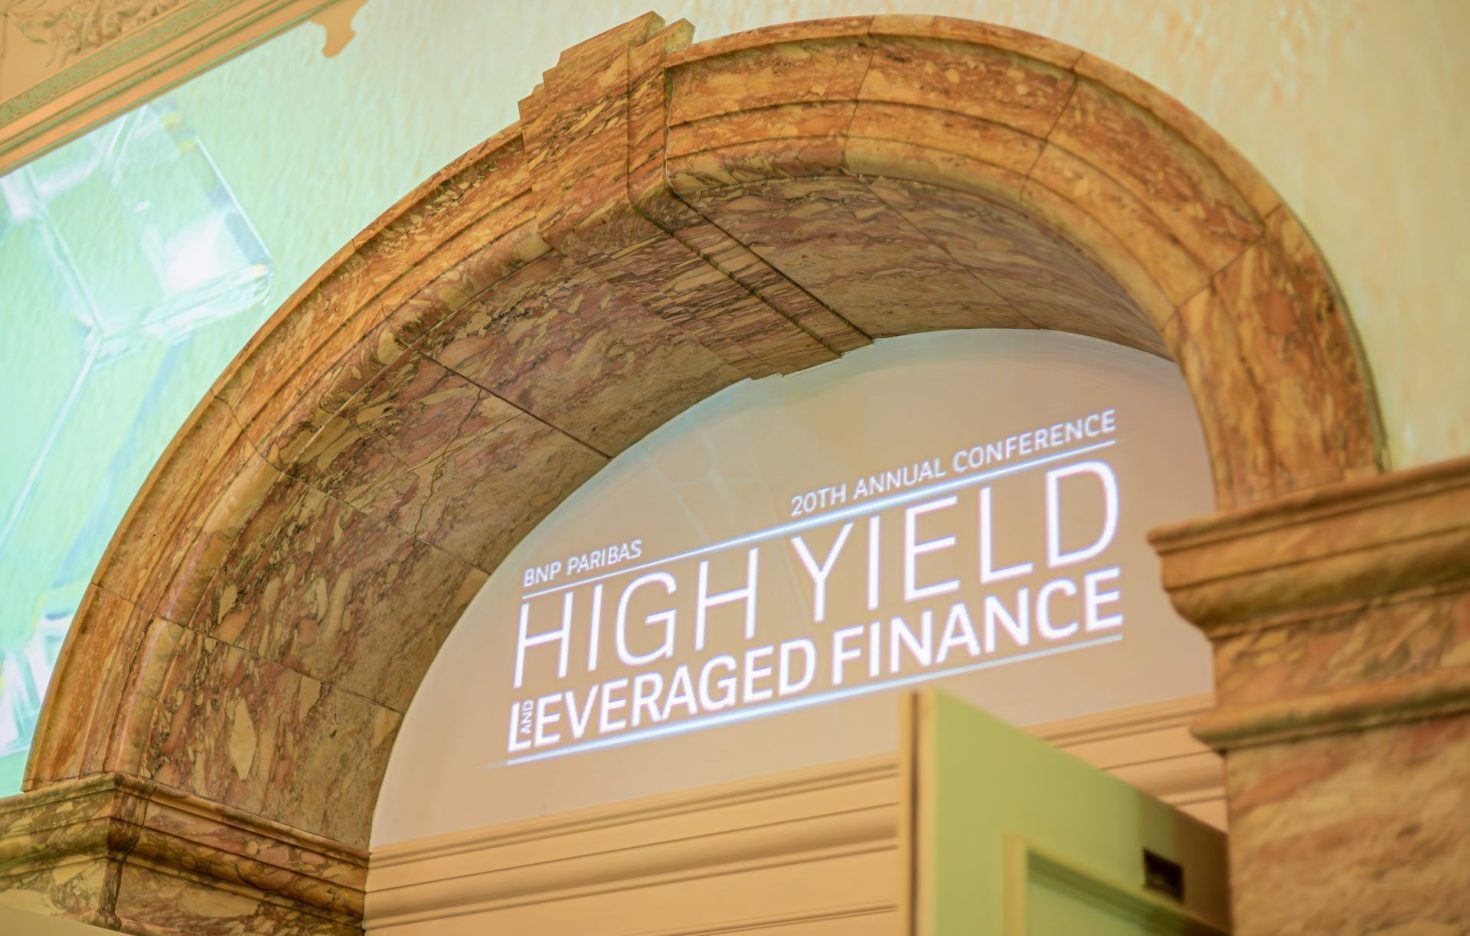 High yield & leveraged finance 2024 high expectations for supply and M